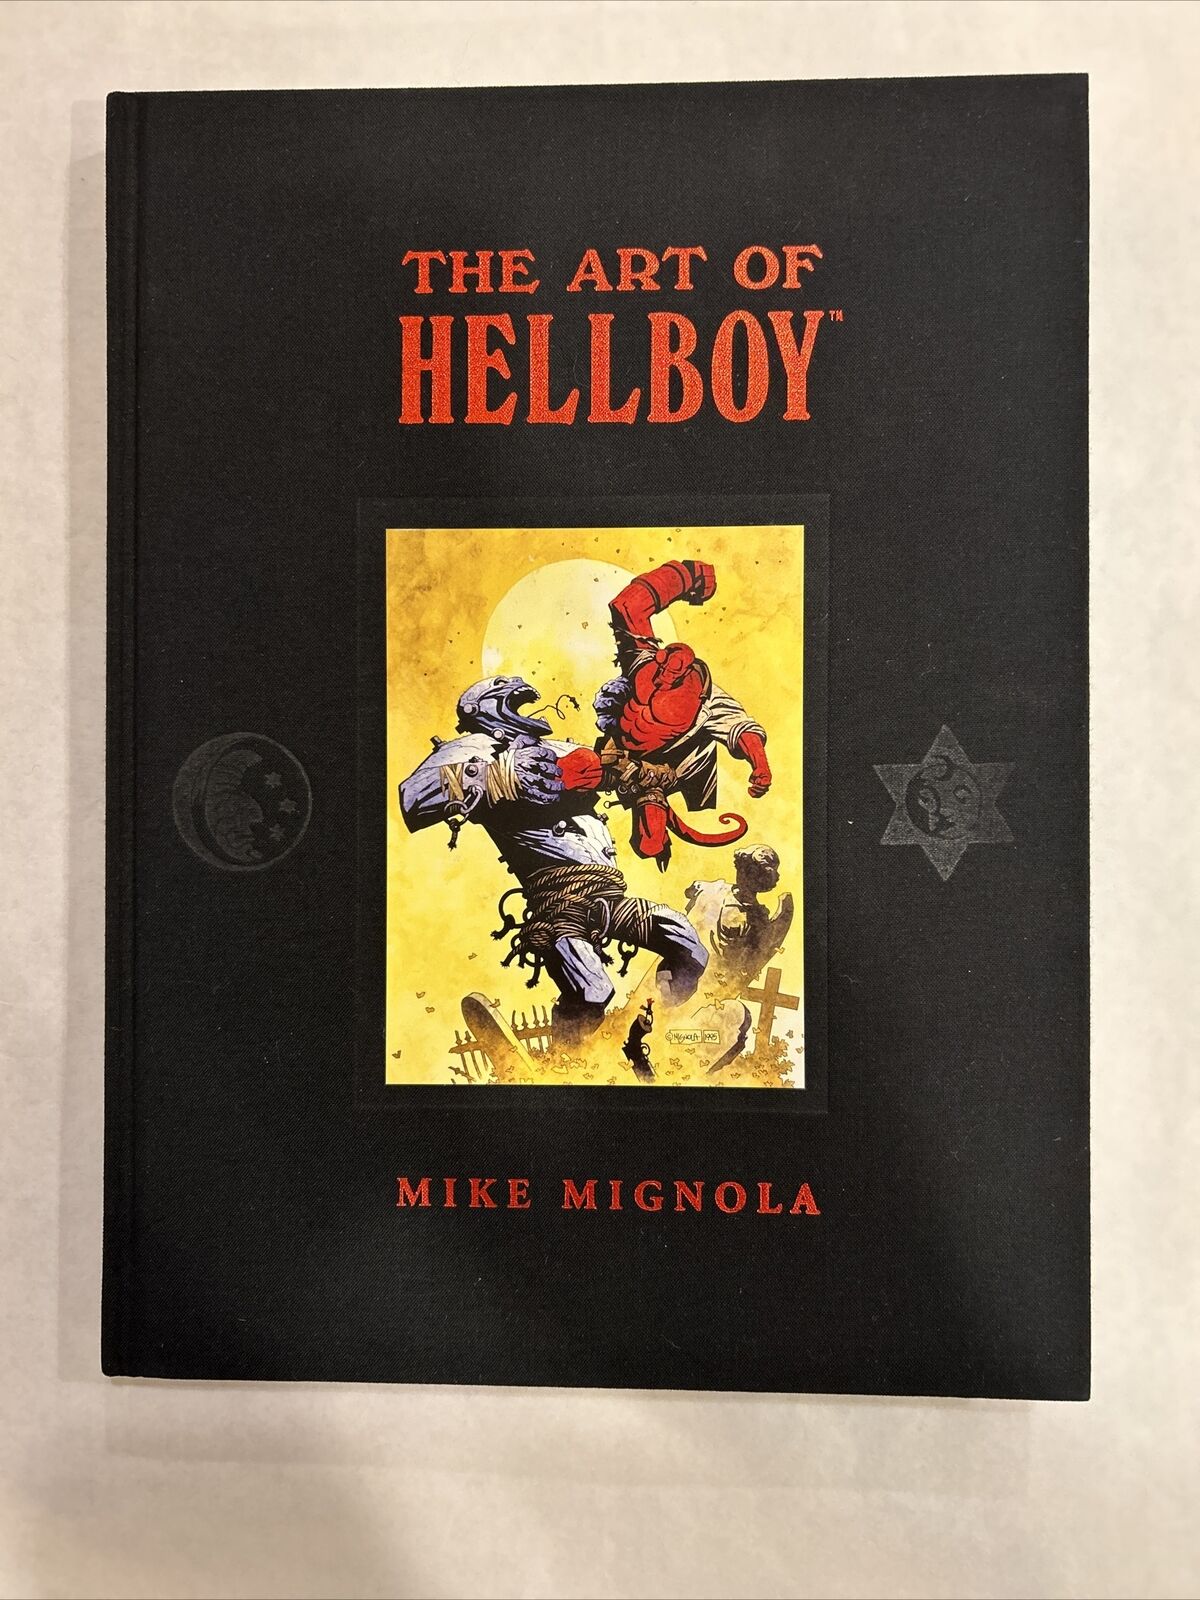 The Art of HellBoy Dark Horse Comics Hardcover by Mike Mignola 2003, Rare Book